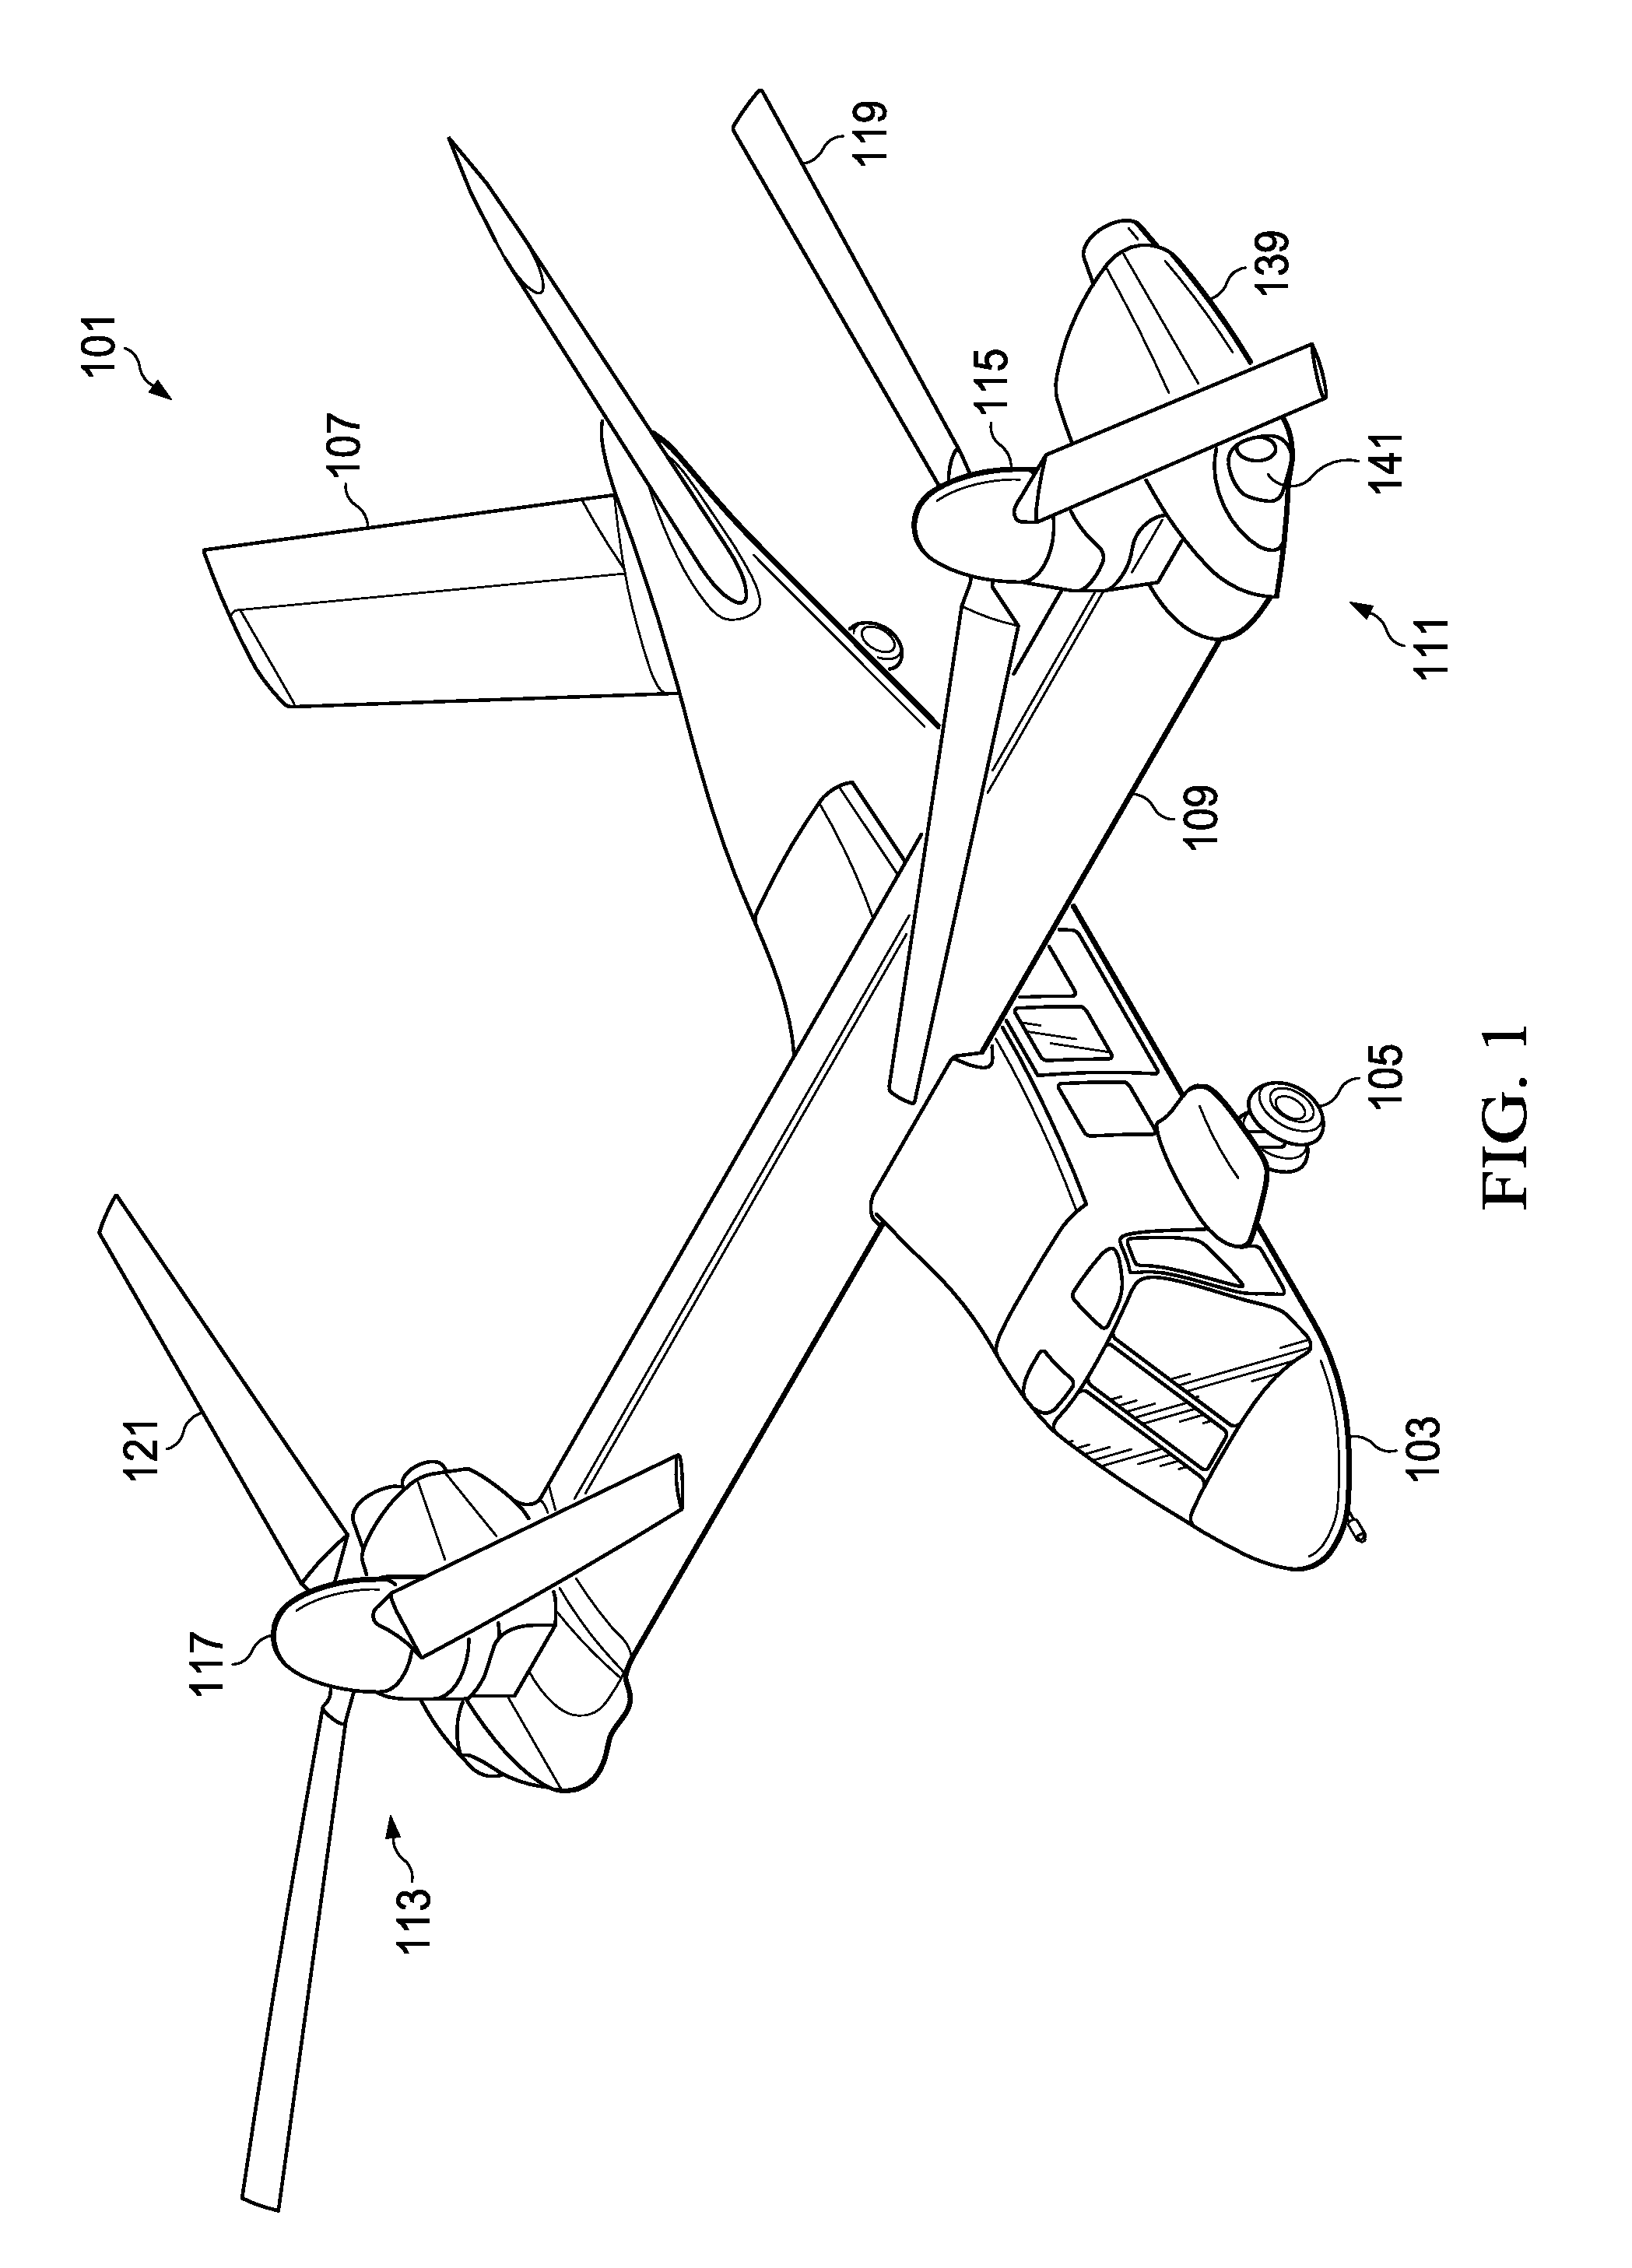 Fixed engine and rotating proprotor arrangement for a tiltrotor aircraft